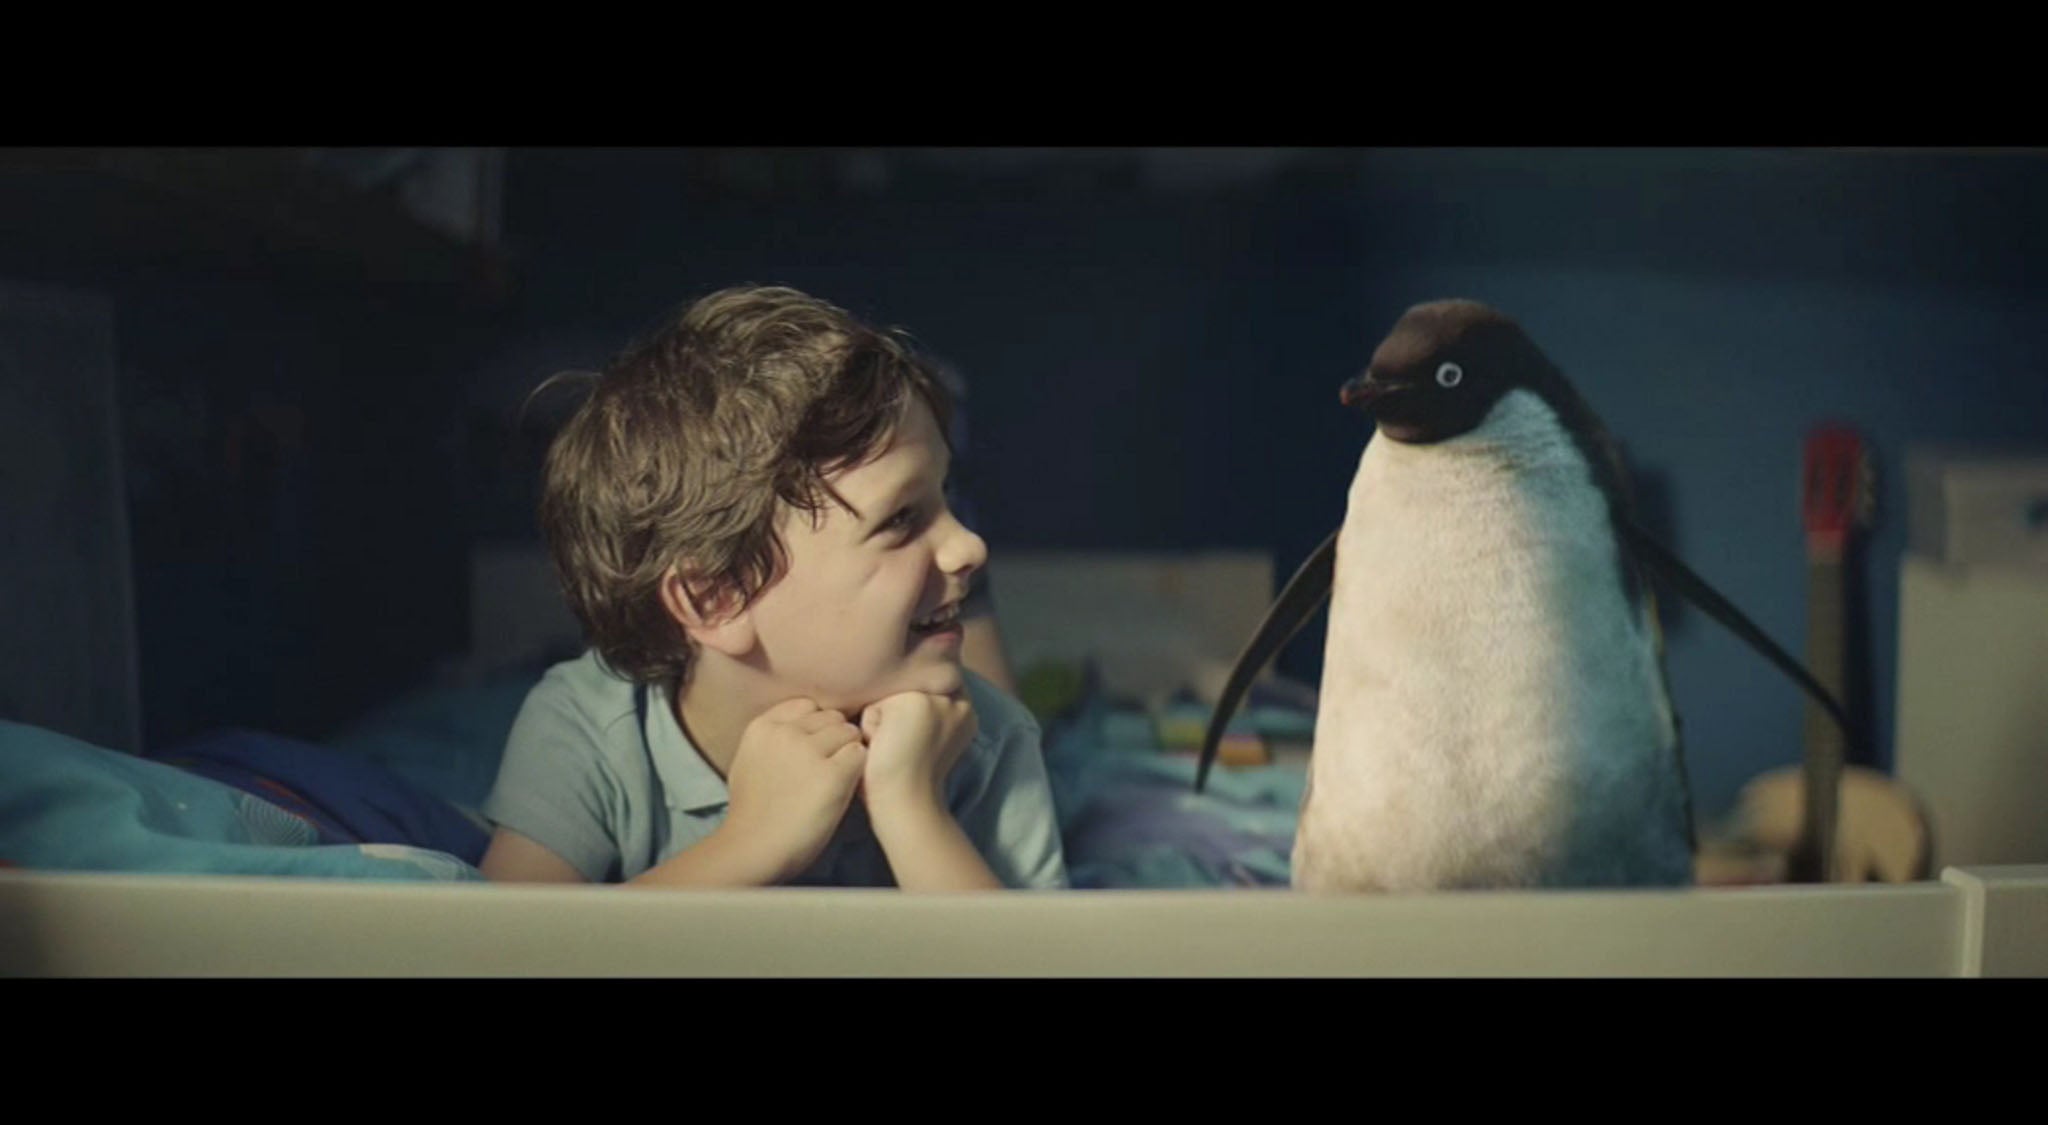 A scene from the 2014 John Lewis Christmas advert